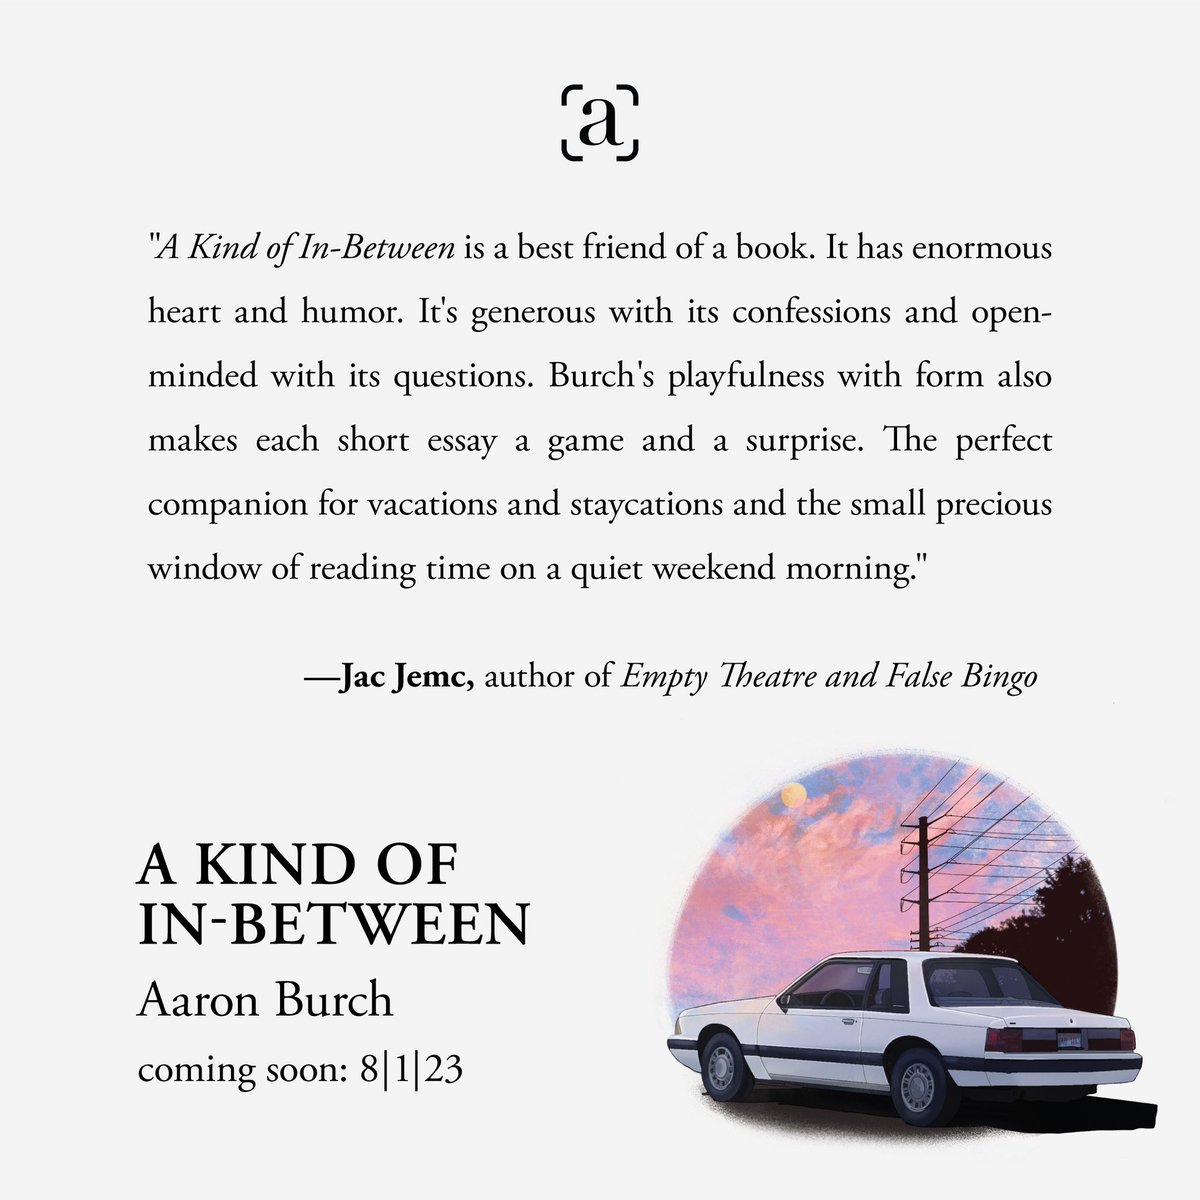 More love for @Aaron__Burch’s A KIND OF IN-BETWEEN. Thanks, @jacjemc! Out soon 🎉